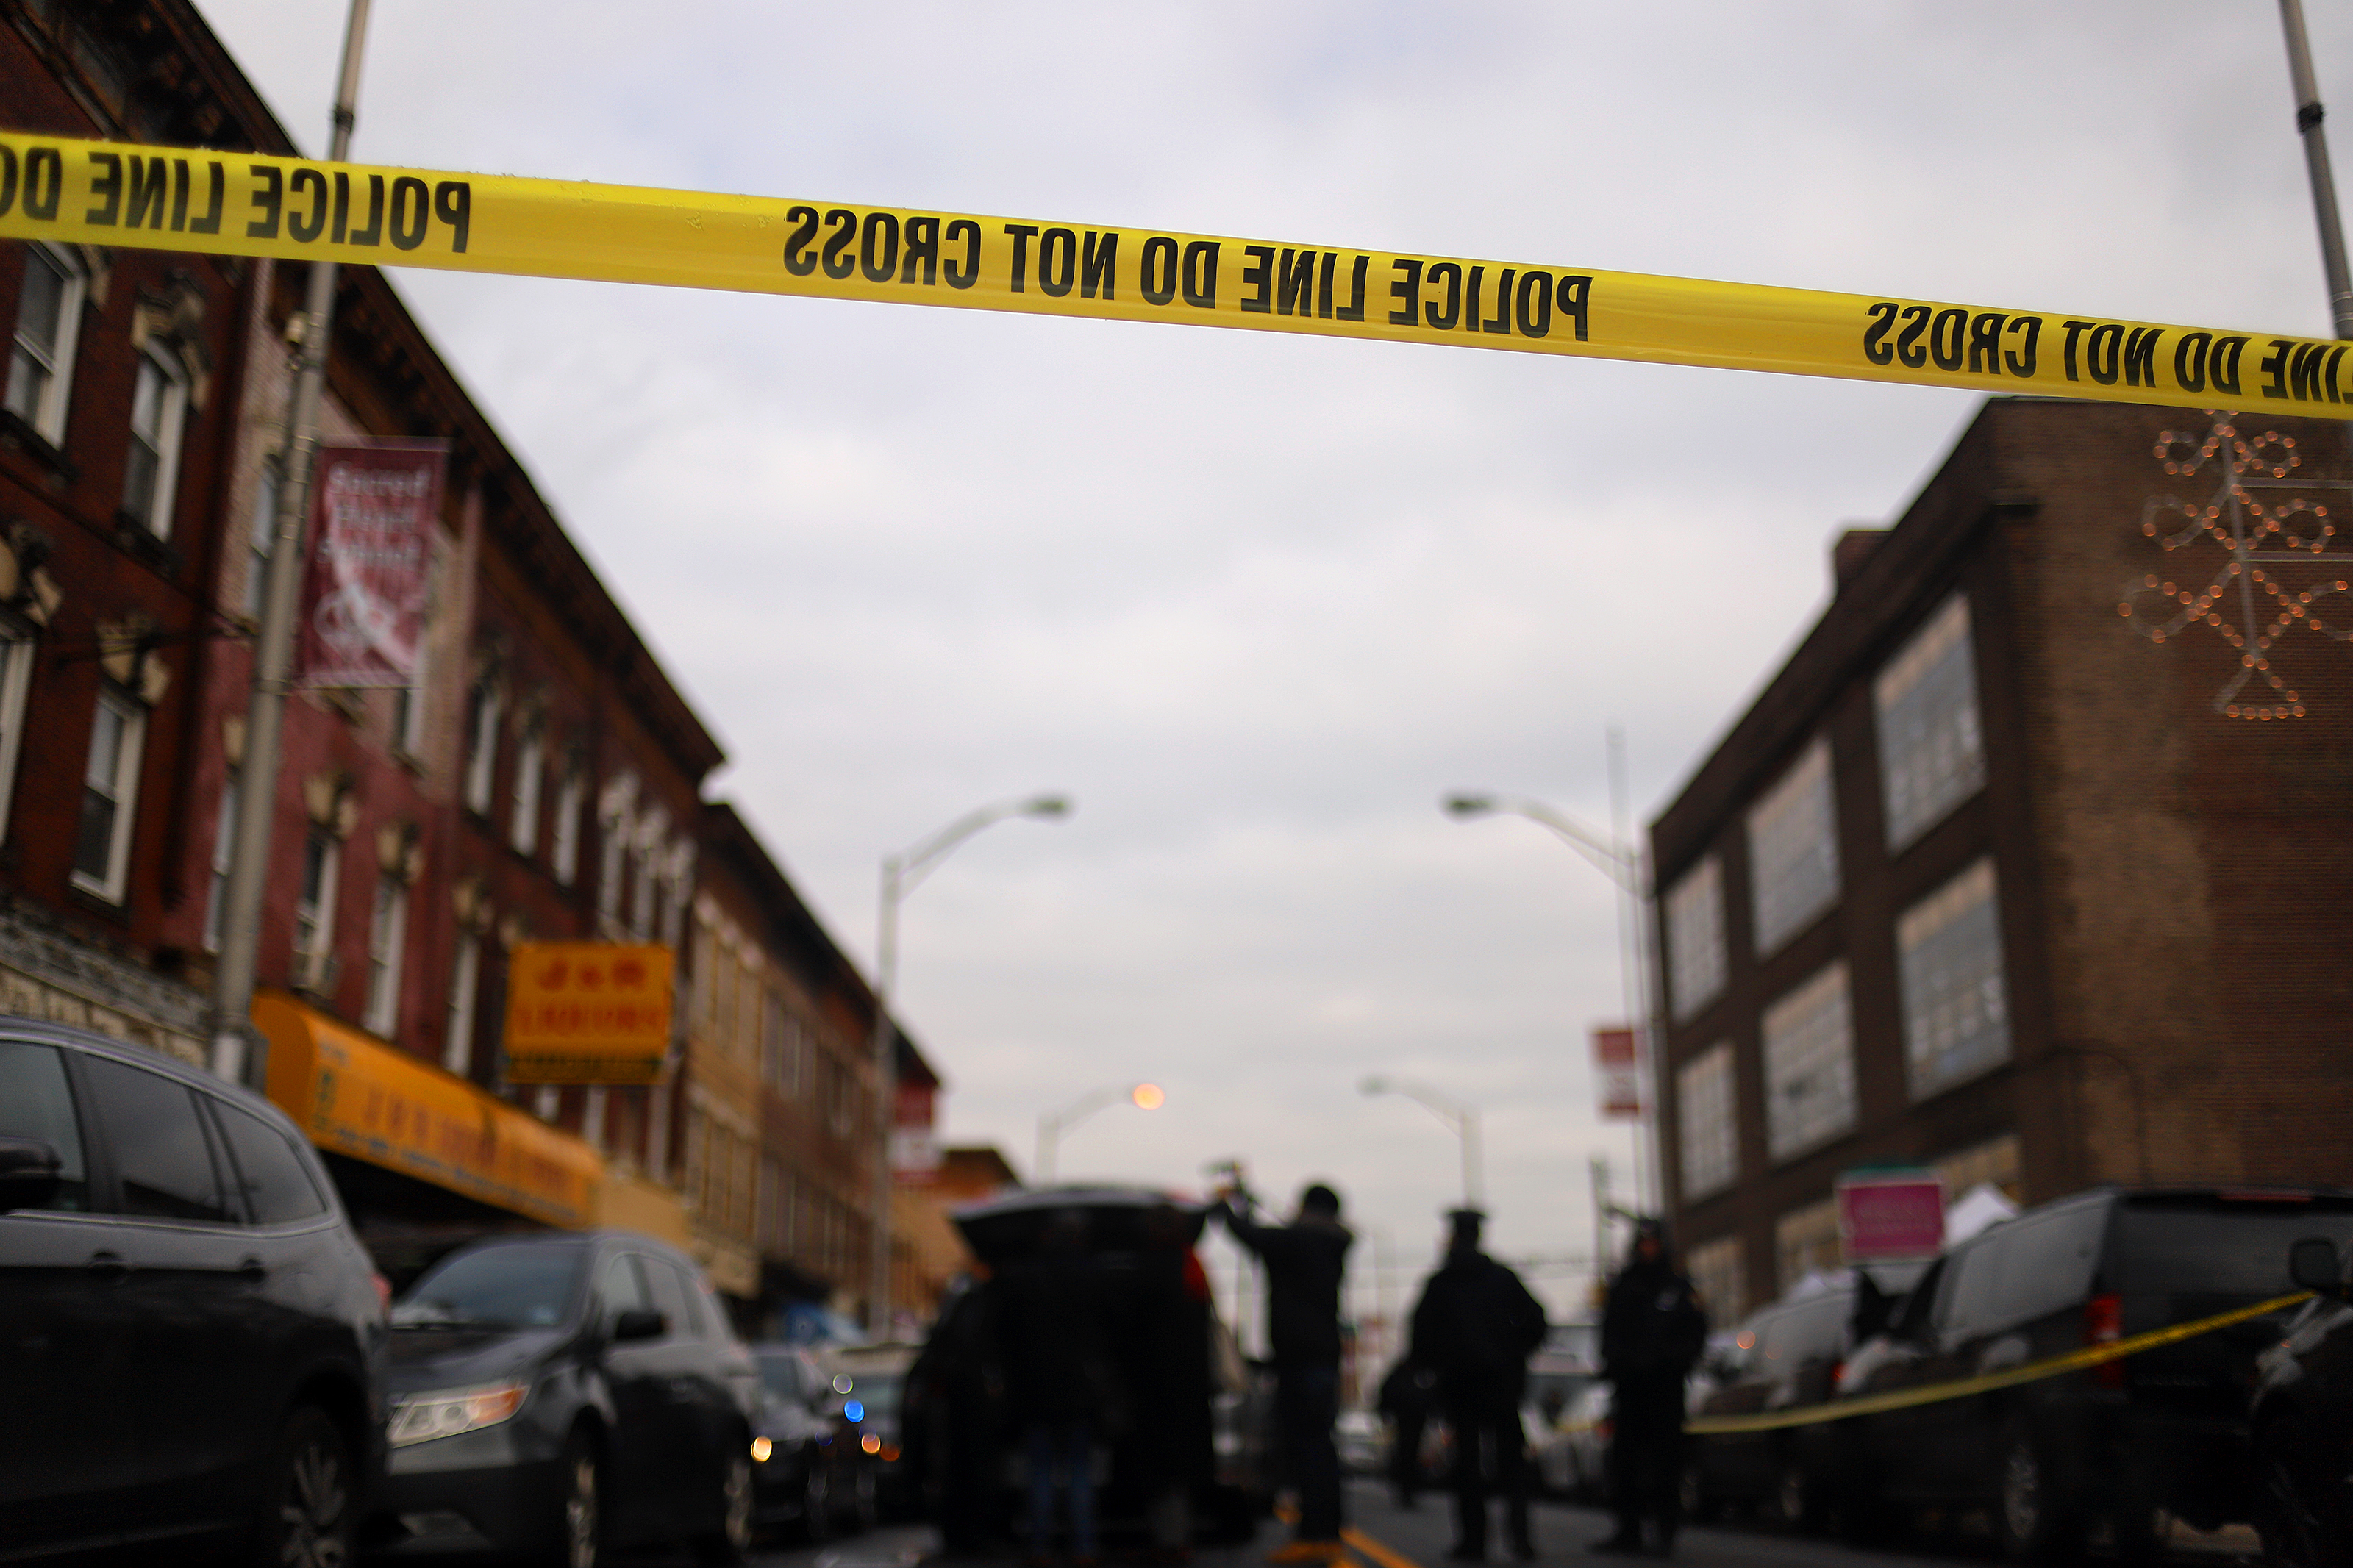 Recovery and clean up crews arrive to the JC Kosher Supermarket in the aftermath of a mass shooting on Dec. 11, 2019 in Jersey City, New Jersey. (Rick Loomis—Getty Images)